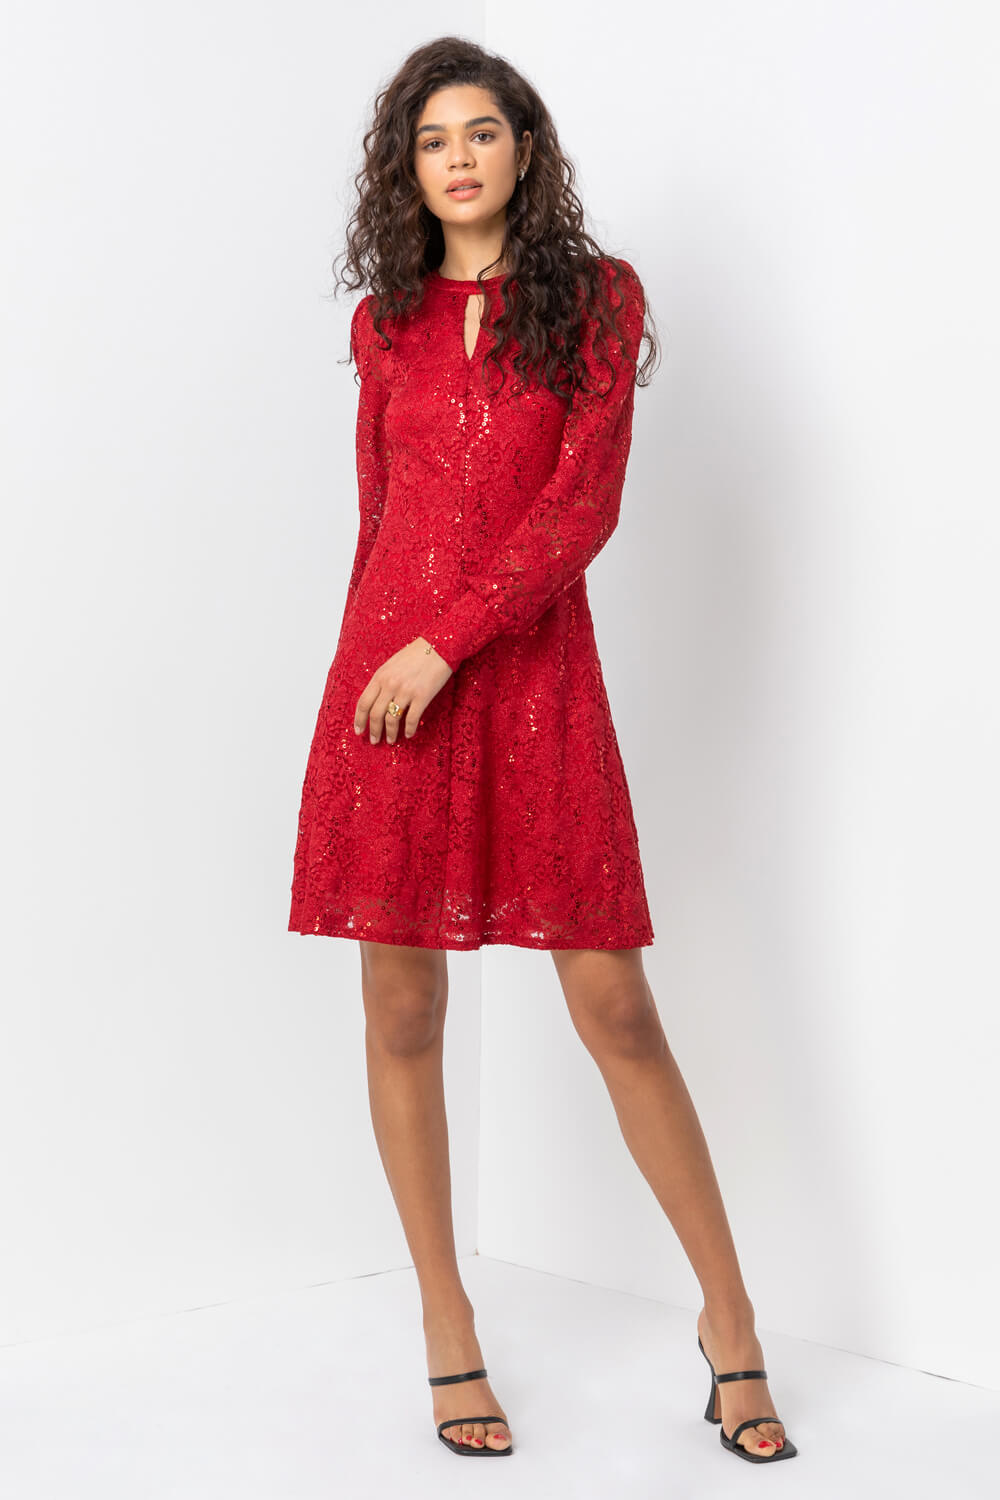 Red Lace Sparkle Swing Dress, Image 3 of 5